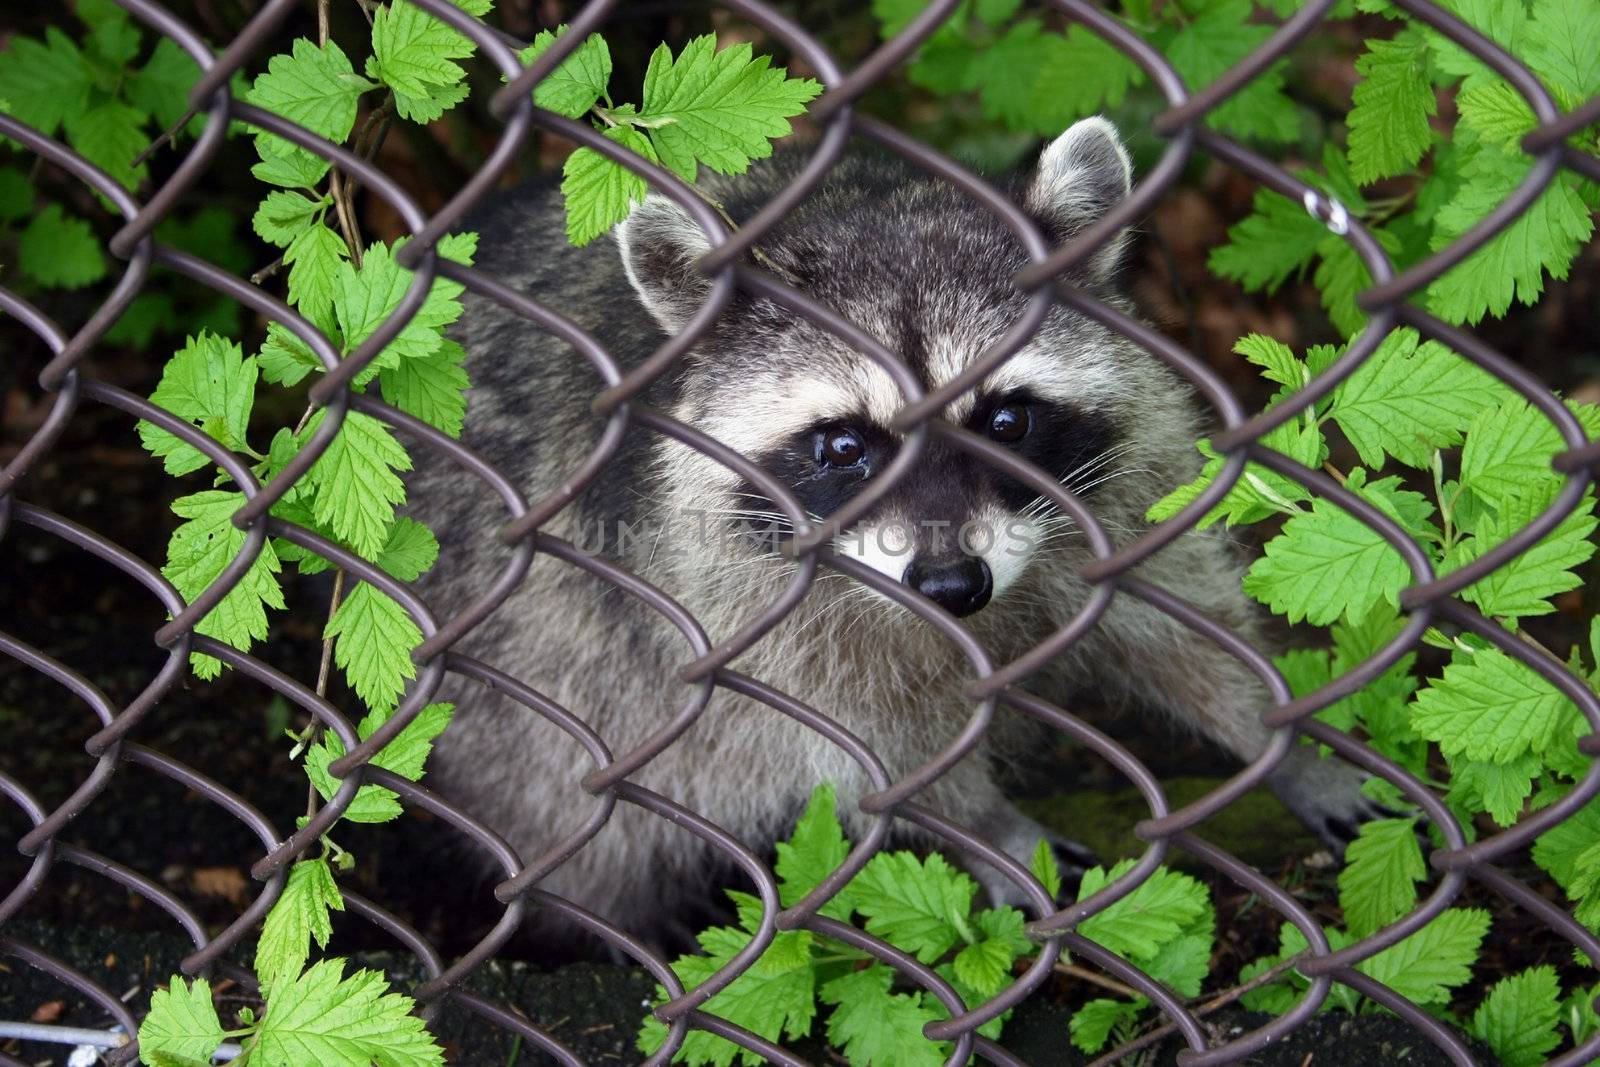 Raccoon behind a fence 1 by micahbowerbank